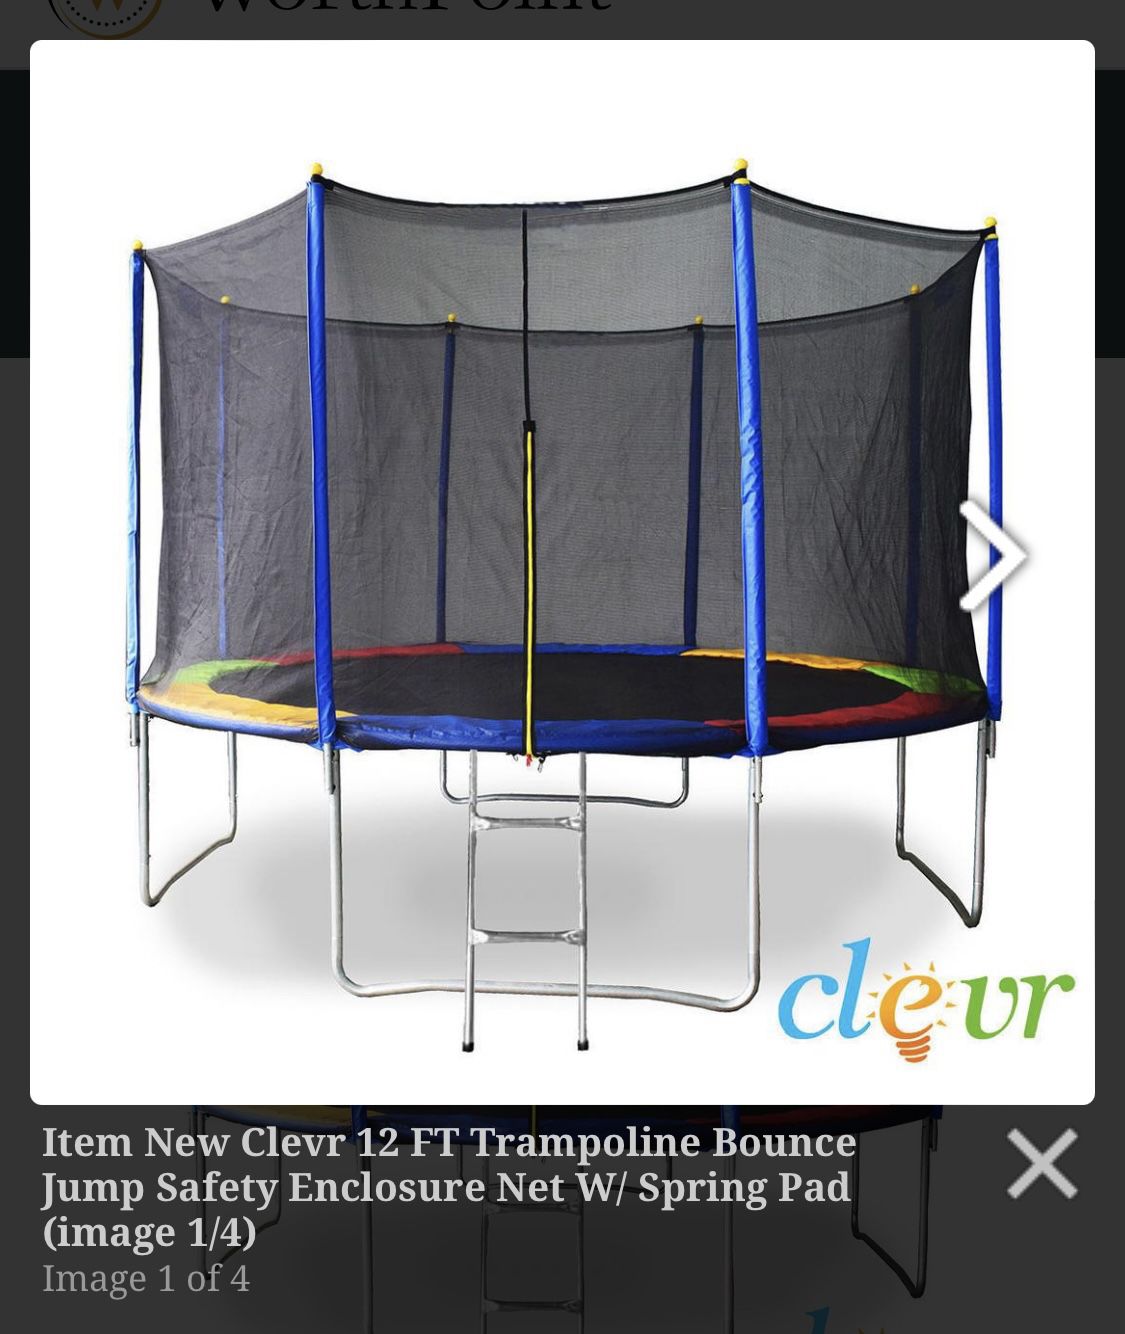 Like NEW CLEVR 12 FT TRAMPOLINE BOUNCE JUMP SAFETY ENCLOSURE NET W/ SPRING PAD 